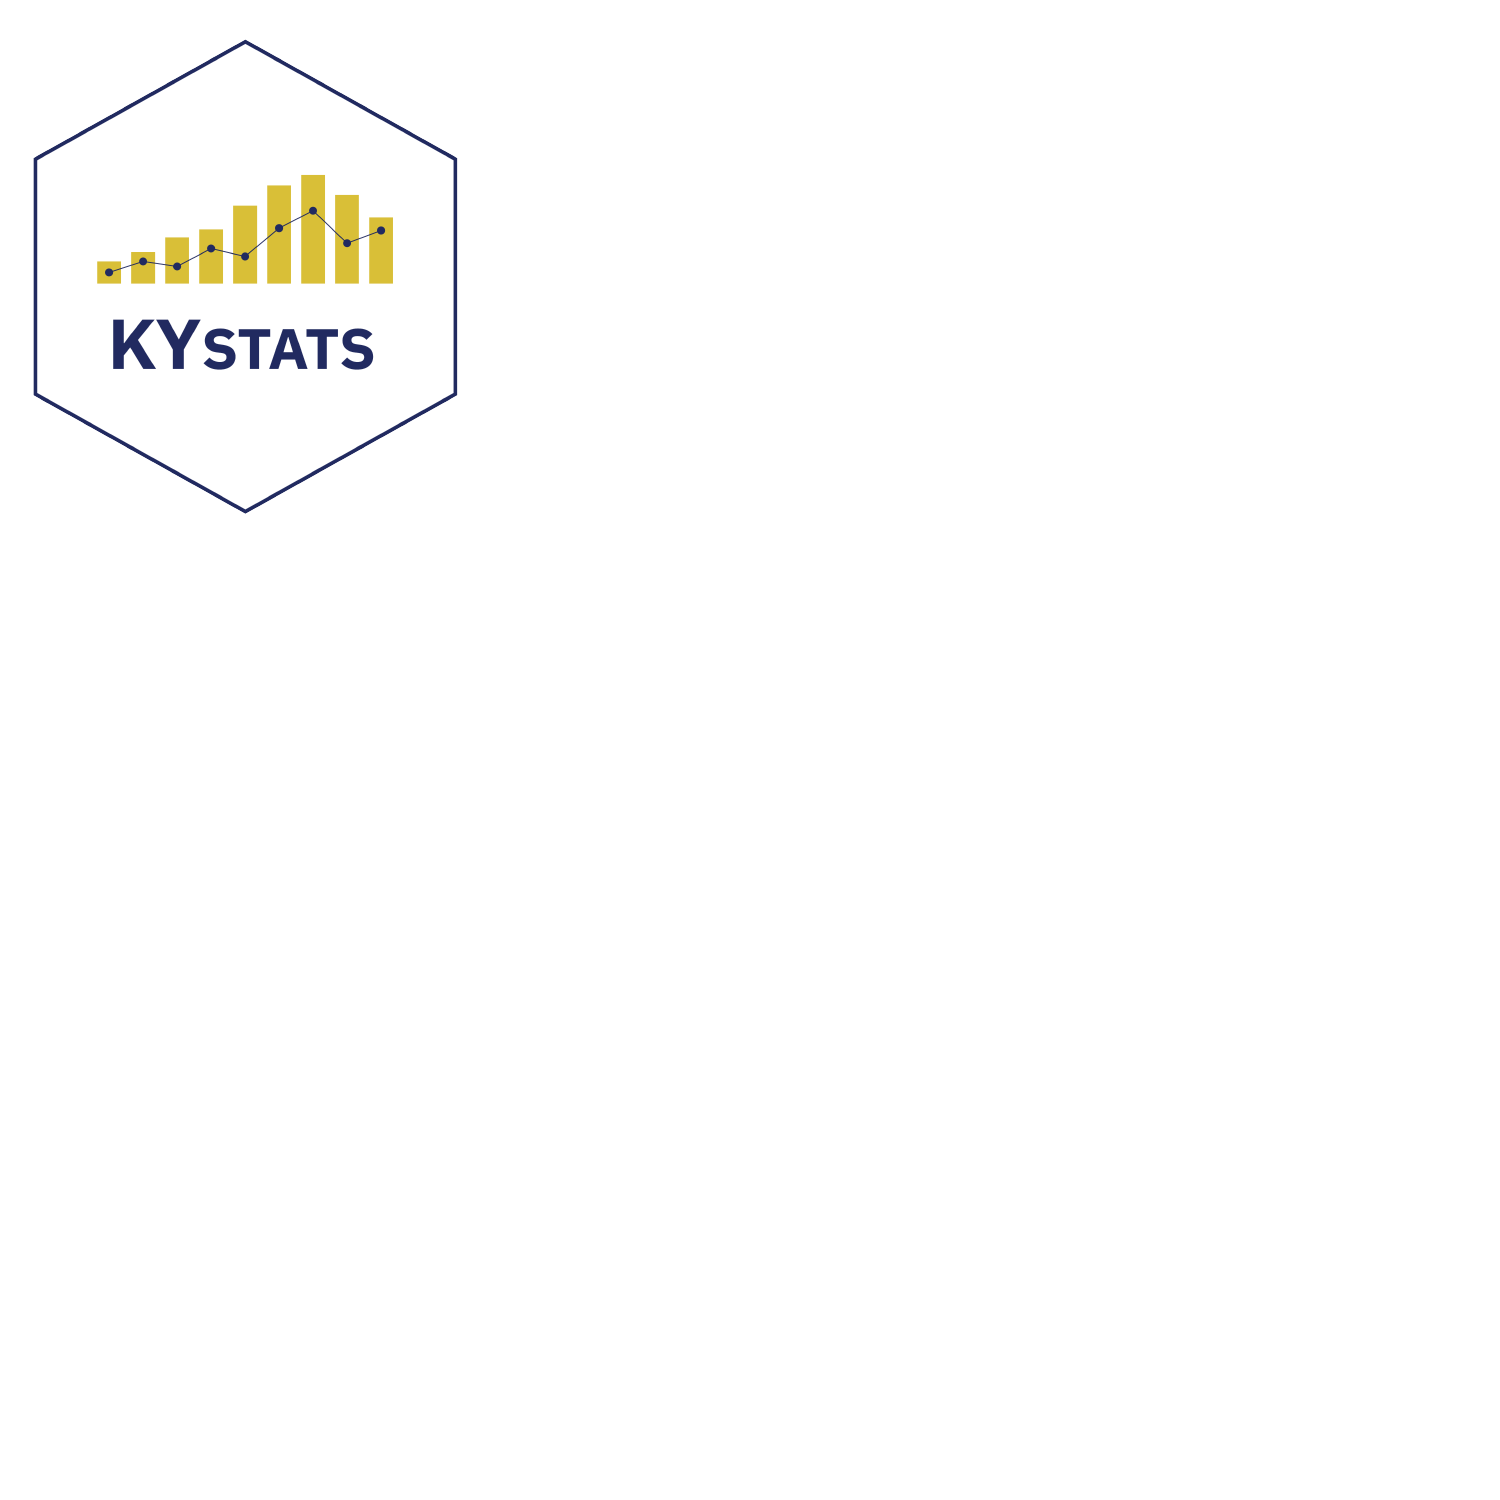 Family Resource Simulator An interactive tool illustrating public assistance benefits and cliff effects - Home Image